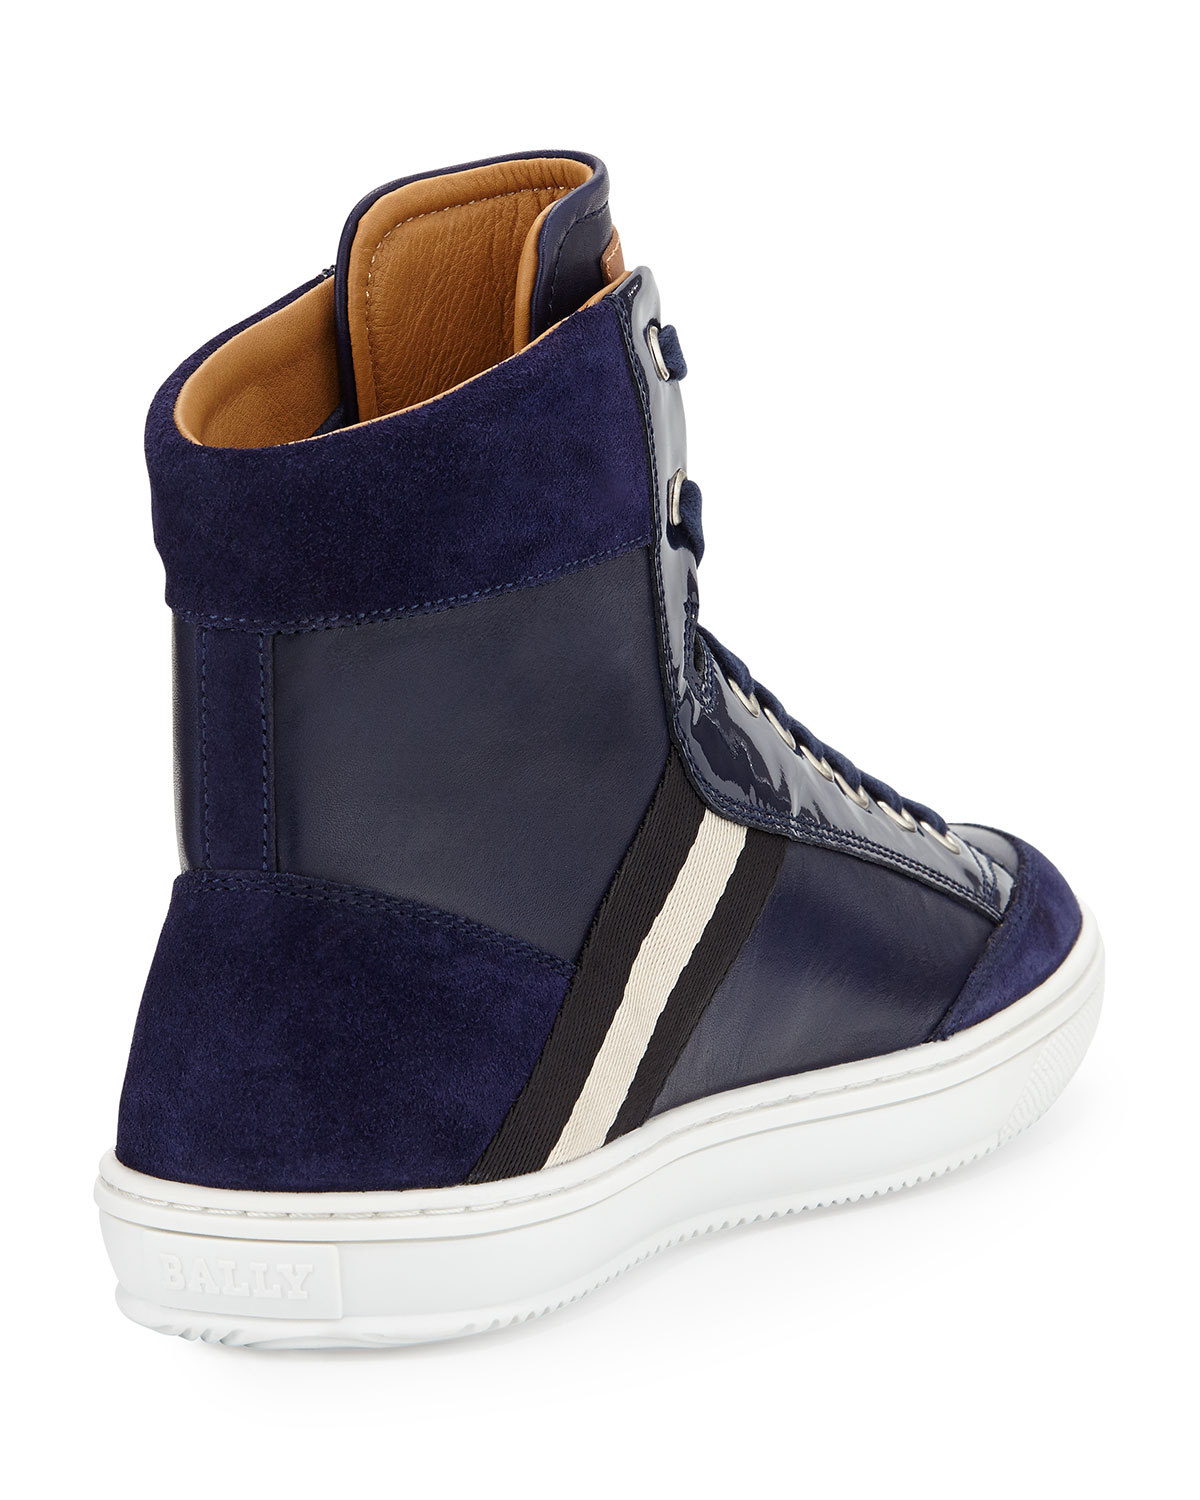 Lyst - Bally Perforated Leather Logo Sneaker in Blue for Men